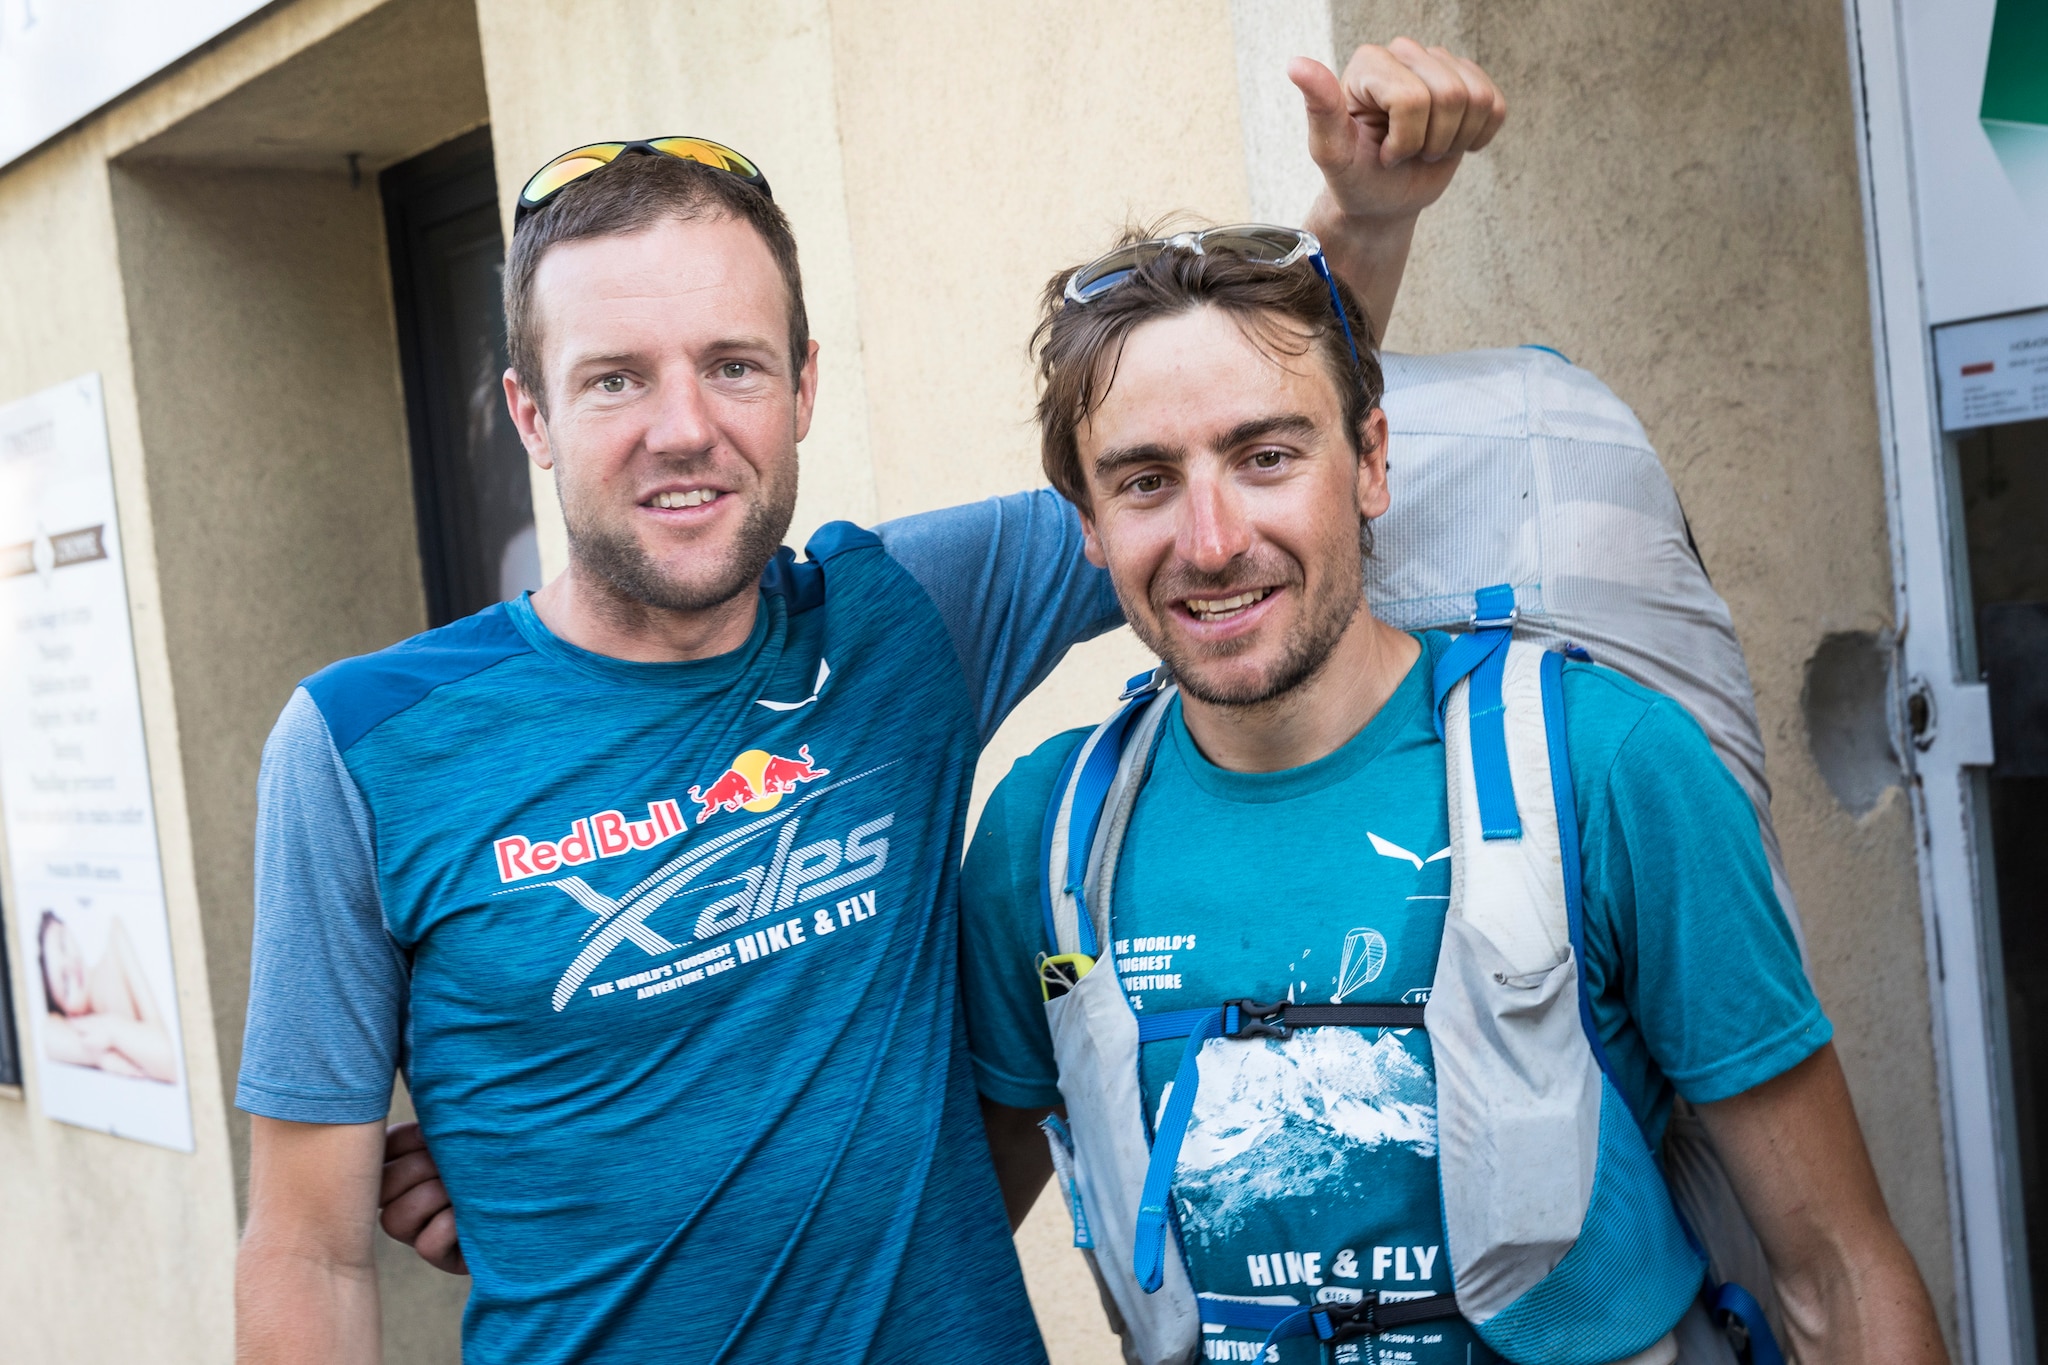 Maxime Pinot (FRA4) finishes the Red Bull X-Alps in Peille, France on June 26, 2019